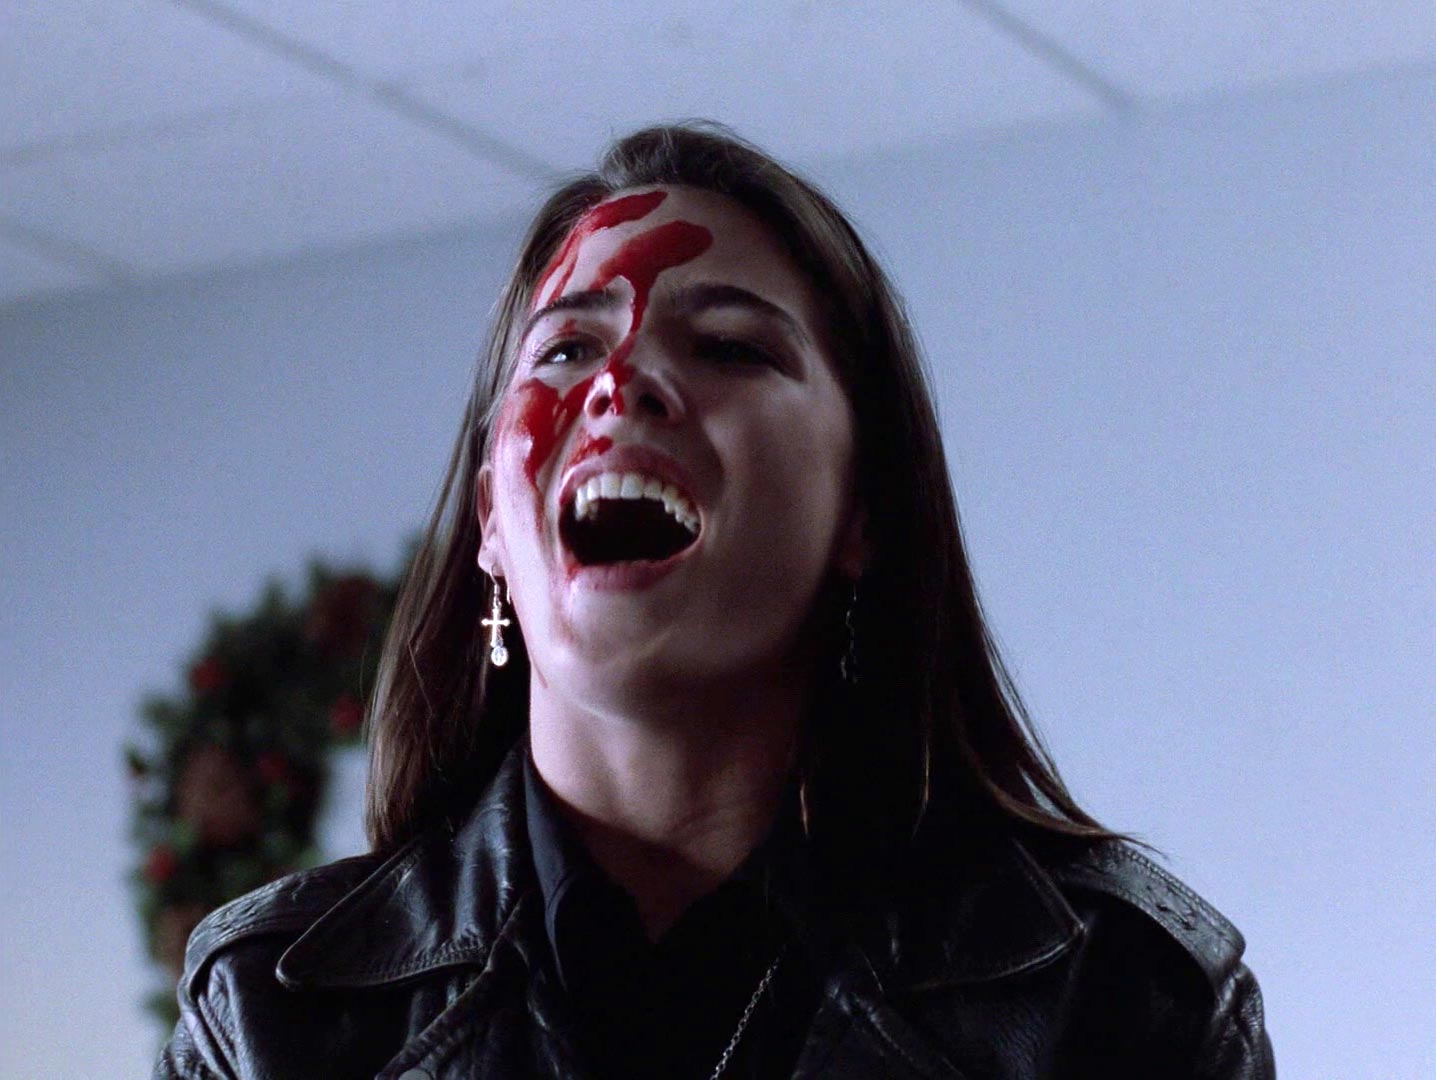 Monte Hellman's Silent Night, Deadly Night 3: Better Watch Out